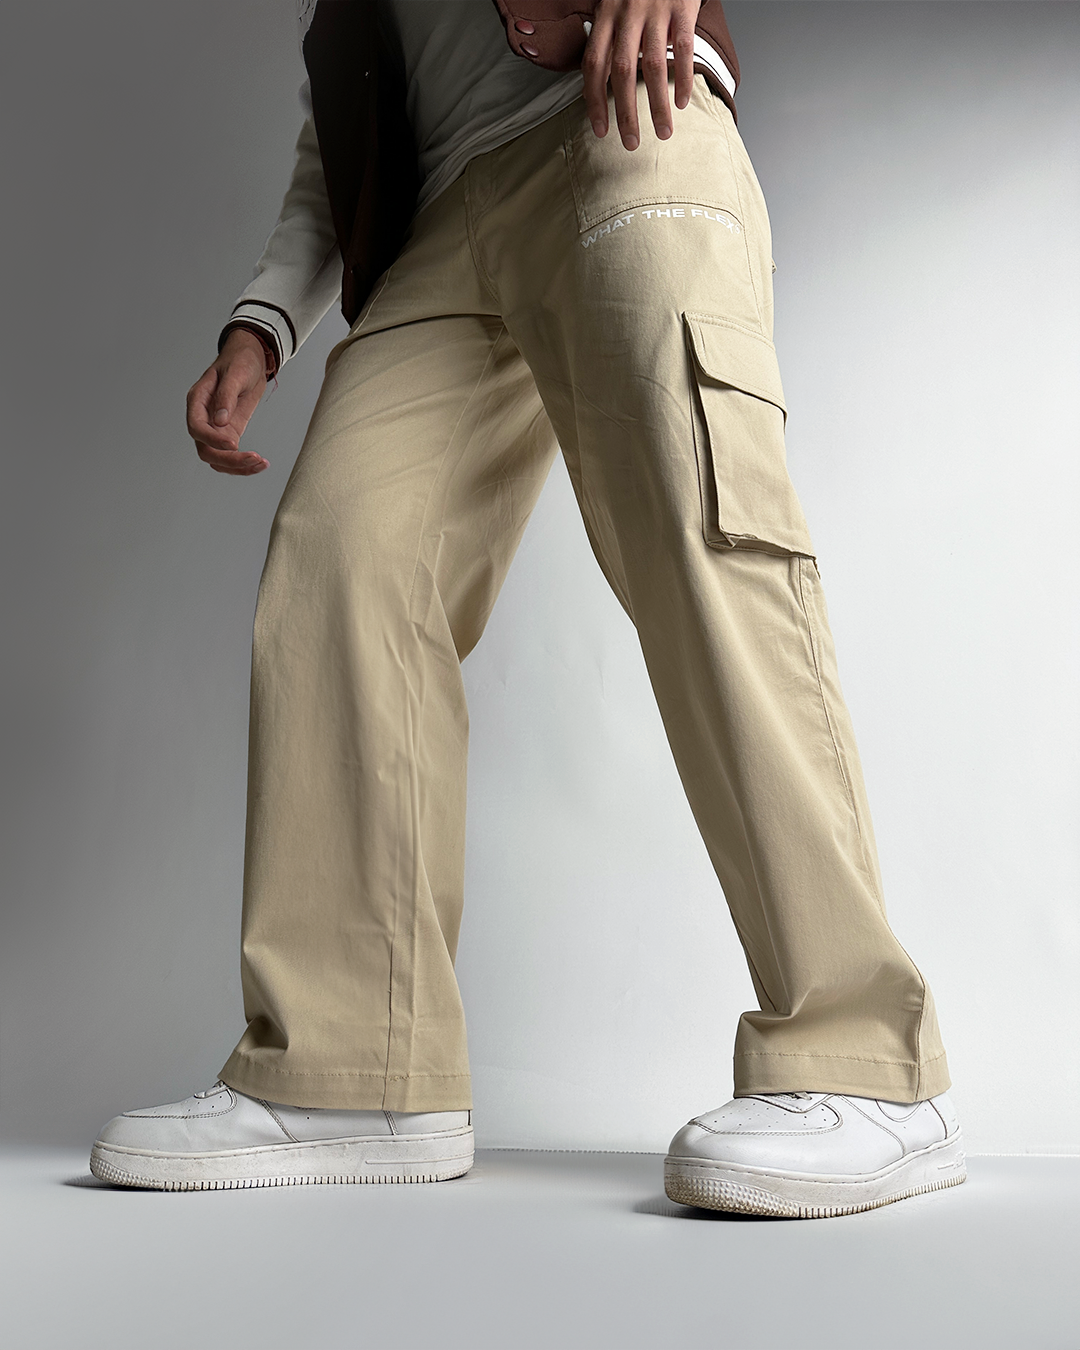 Fire Flame 6 Pocket Cargo Pant